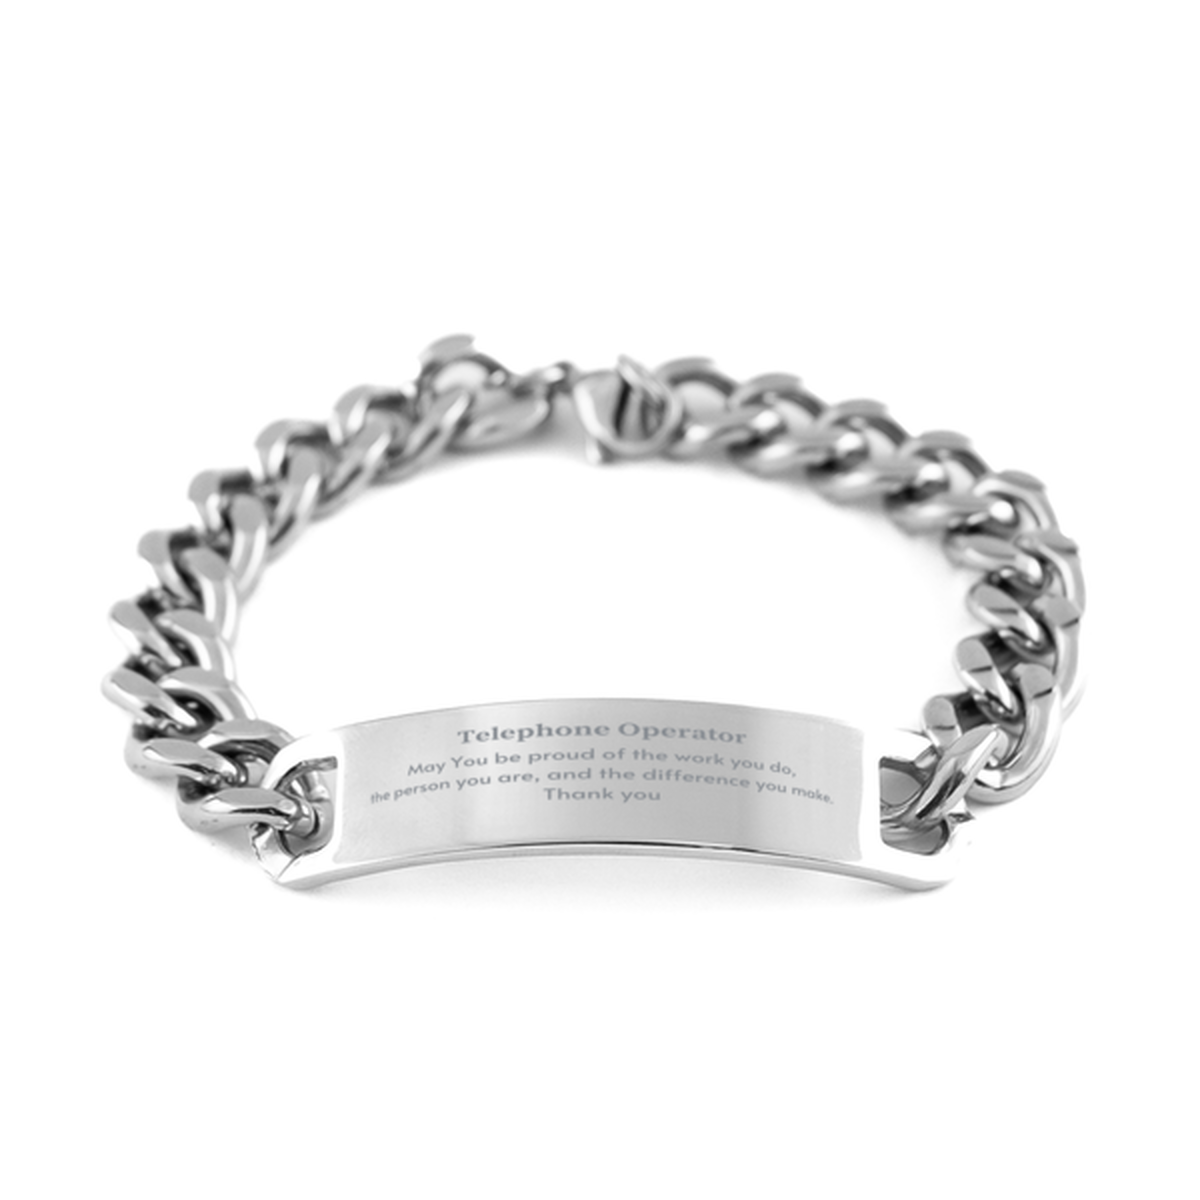 Heartwarming Cuban Chain Stainless Steel Bracelet Retirement Coworkers Gifts for Telephone Operator, Telephone Operator May You be proud of the work you do, the person you are Gifts for Boss Men Women Friends